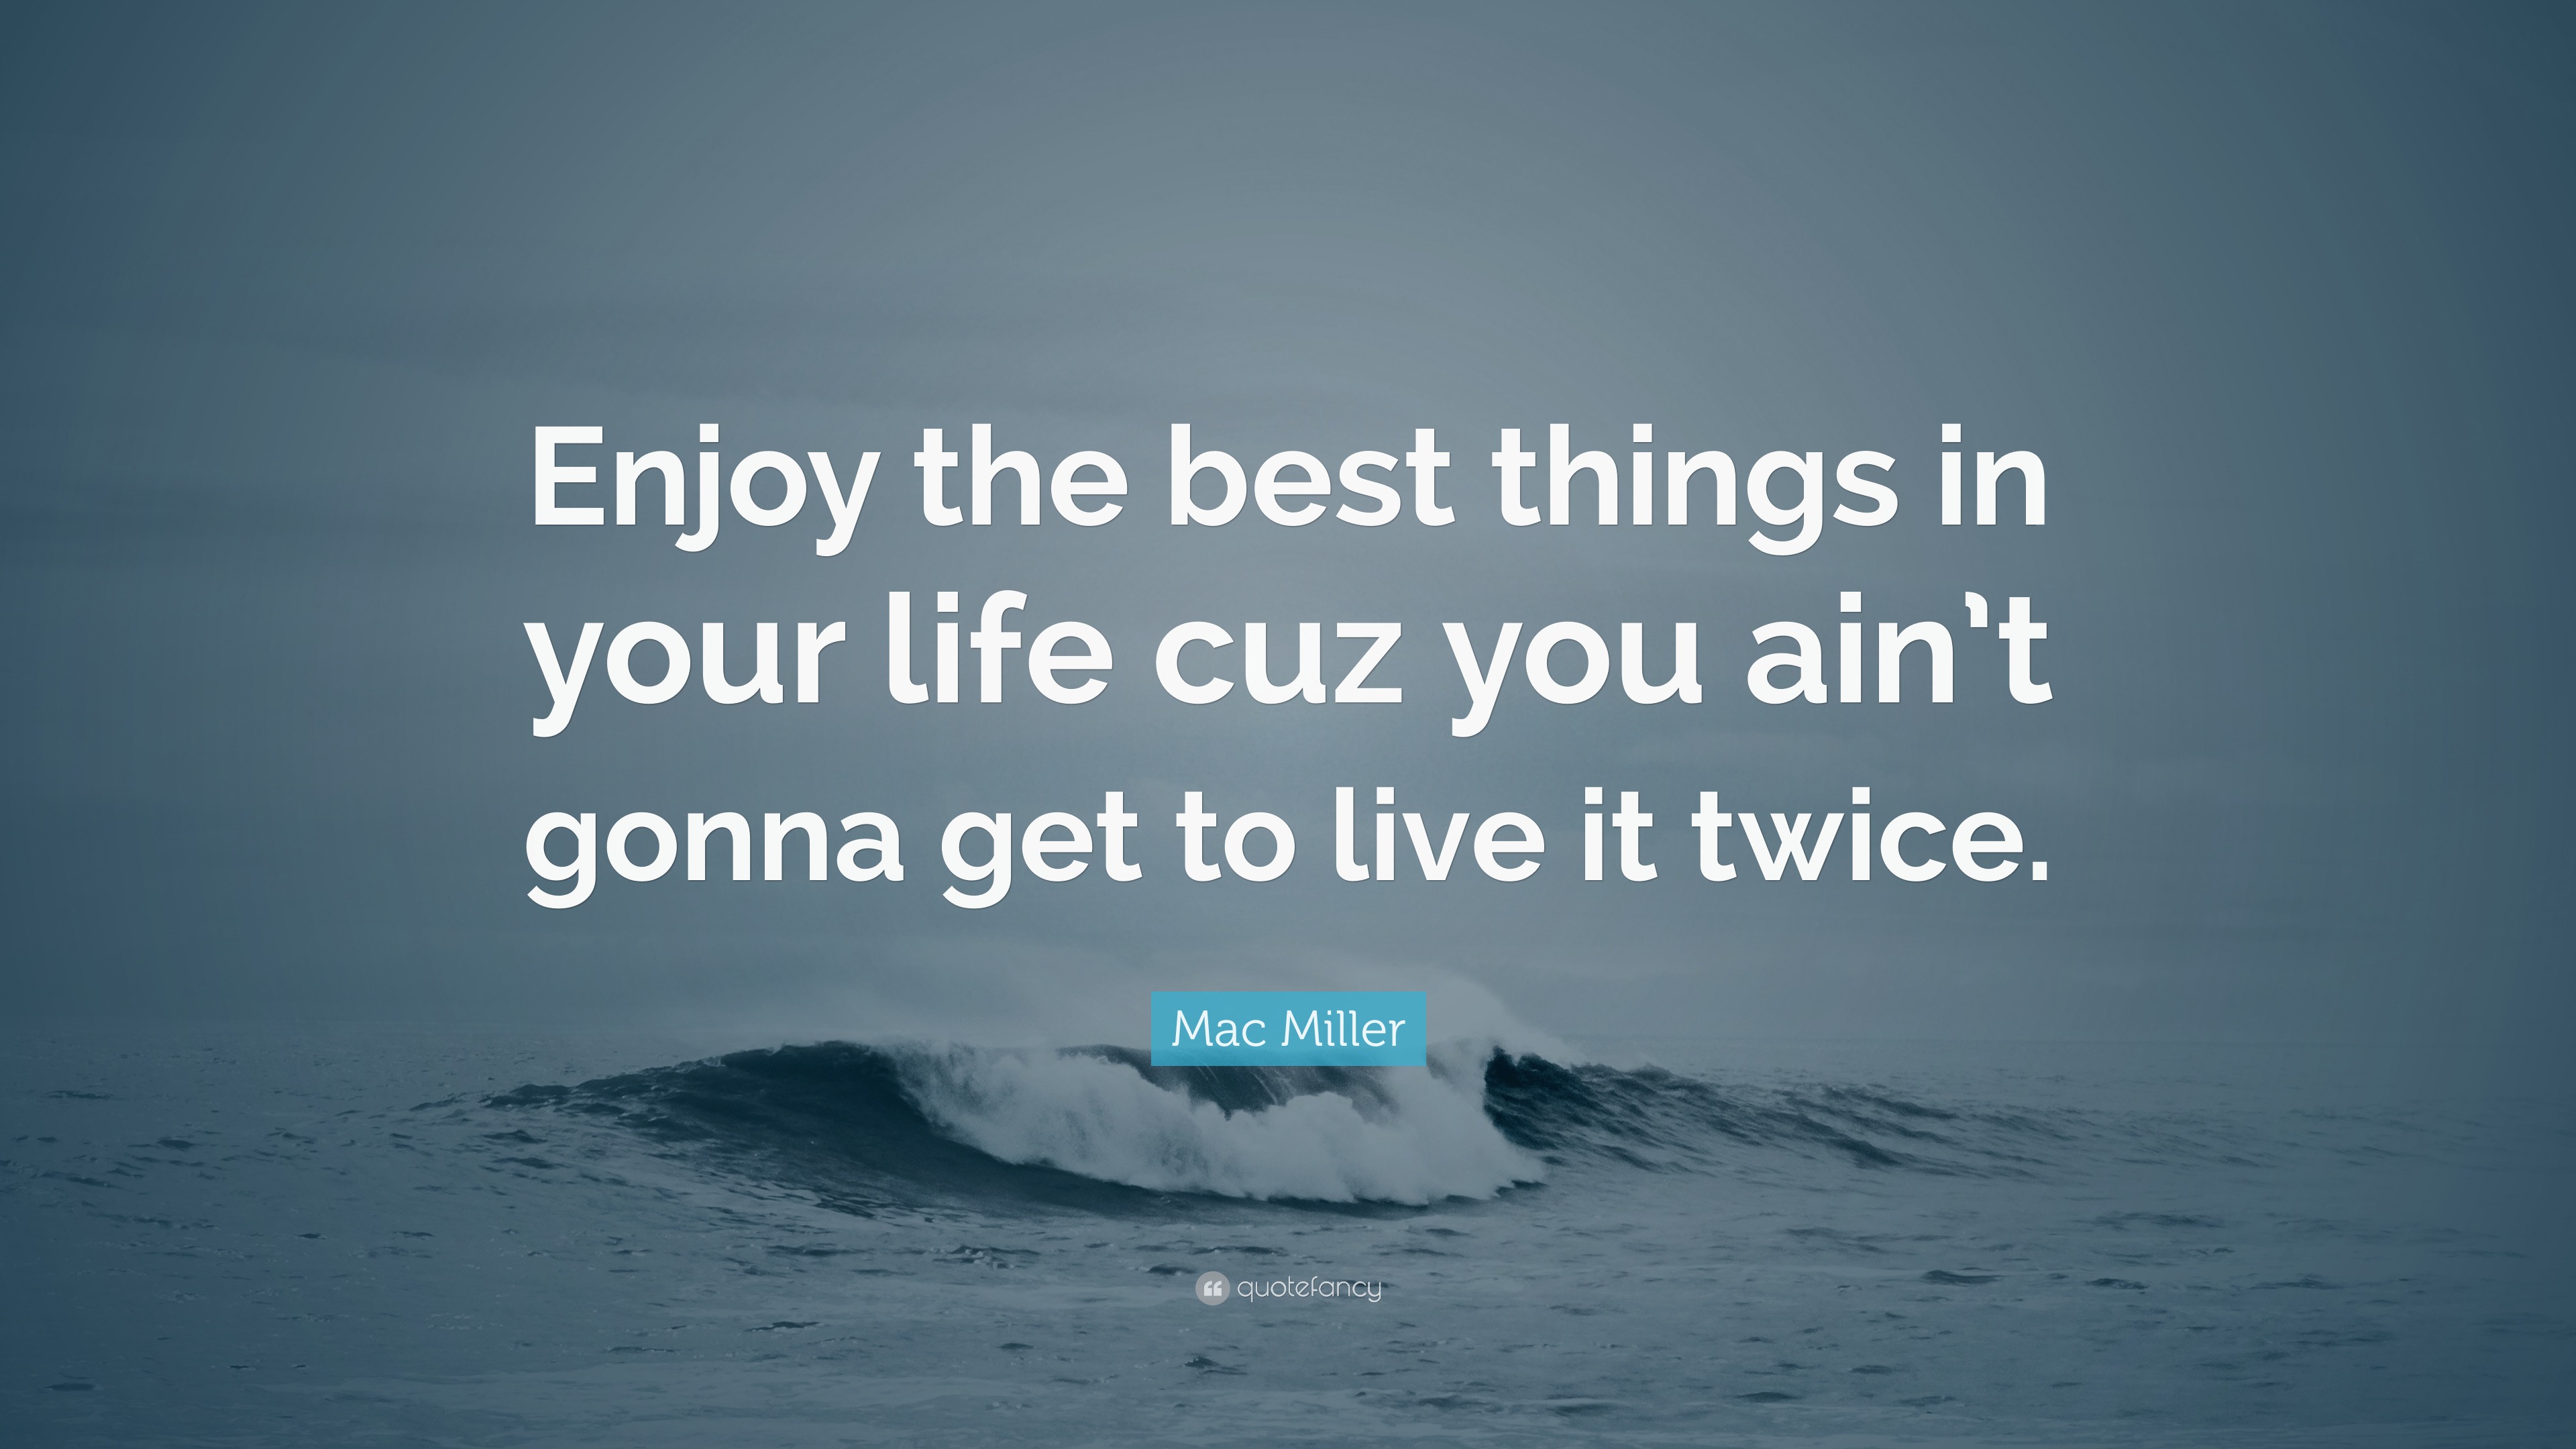 enjoy the life quote mac miller quote u201cenjoy the best things in your life cuz you ain